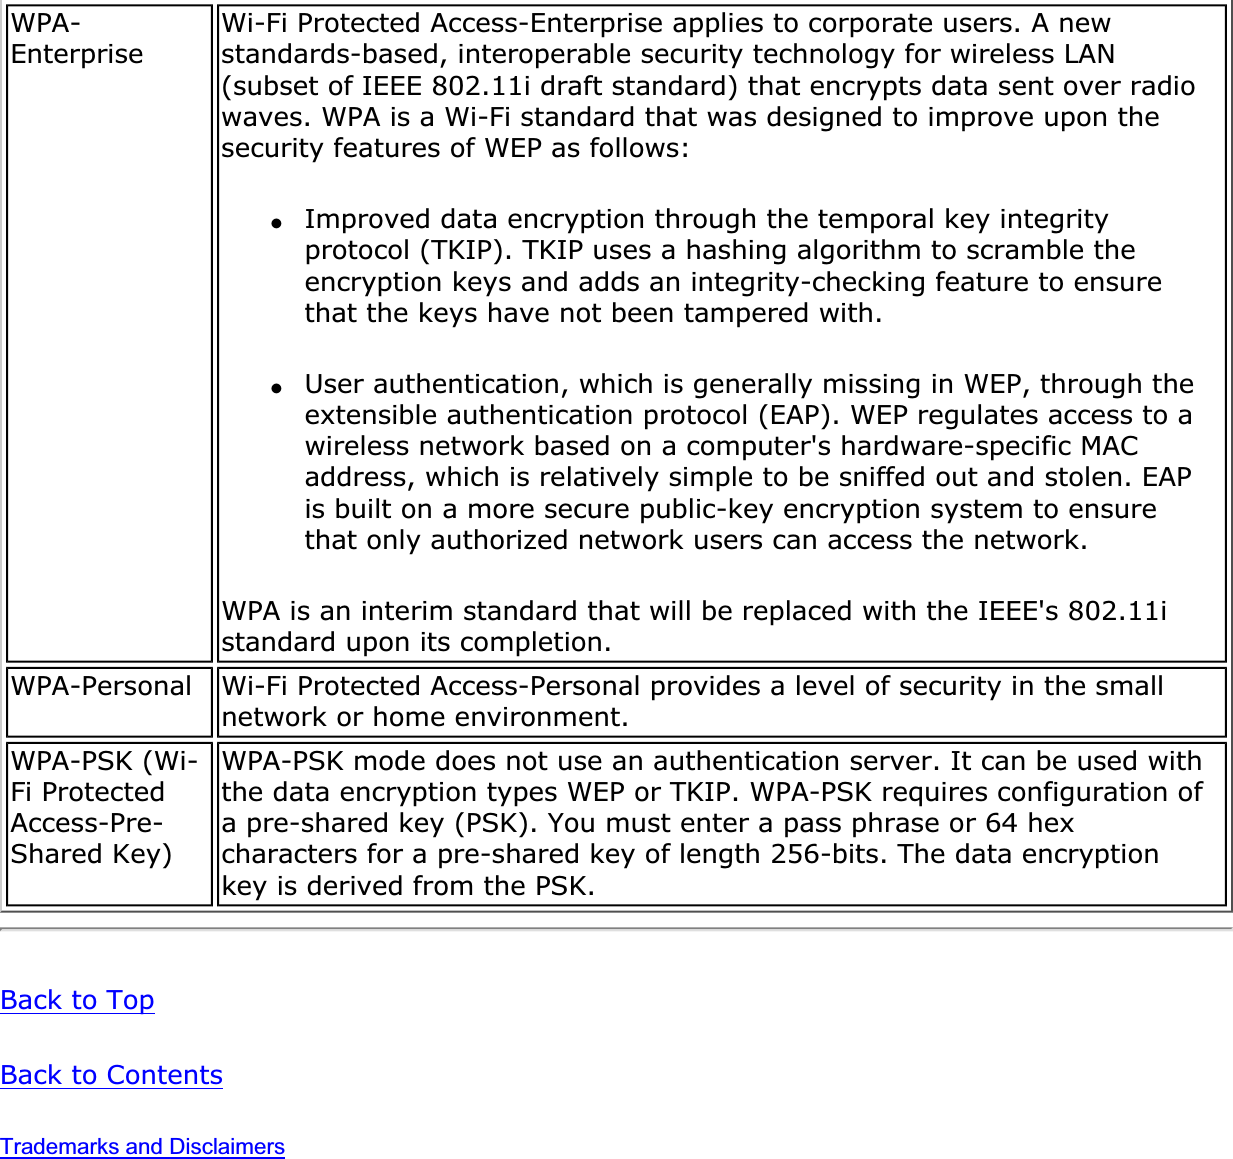 WPA-Enterprise Wi-Fi Protected Access-Enterprise applies to corporate users. A new standards-based, interoperable security technology for wireless LAN (subset of IEEE 802.11i draft standard) that encrypts data sent over radio waves. WPA is a Wi-Fi standard that was designed to improve upon the security features of WEP as follows: ●Improved data encryption through the temporal key integrity protocol (TKIP). TKIP uses a hashing algorithm to scramble the encryption keys and adds an integrity-checking feature to ensure that the keys have not been tampered with.●User authentication, which is generally missing in WEP, through the extensible authentication protocol (EAP). WEP regulates access to a wireless network based on a computer&apos;s hardware-specific MAC address, which is relatively simple to be sniffed out and stolen. EAP is built on a more secure public-key encryption system to ensure that only authorized network users can access the network.WPA is an interim standard that will be replaced with the IEEE&apos;s 802.11i standard upon its completion.WPA-Personal Wi-Fi Protected Access-Personal provides a level of security in the small network or home environment.WPA-PSK (Wi-Fi Protected Access-Pre-Shared Key)WPA-PSK mode does not use an authentication server. It can be used with the data encryption types WEP or TKIP. WPA-PSK requires configuration of a pre-shared key (PSK). You must enter a pass phrase or 64 hex characters for a pre-shared key of length 256-bits. The data encryption key is derived from the PSK.Back to TopBack to ContentsTrademarks and Disclaimers